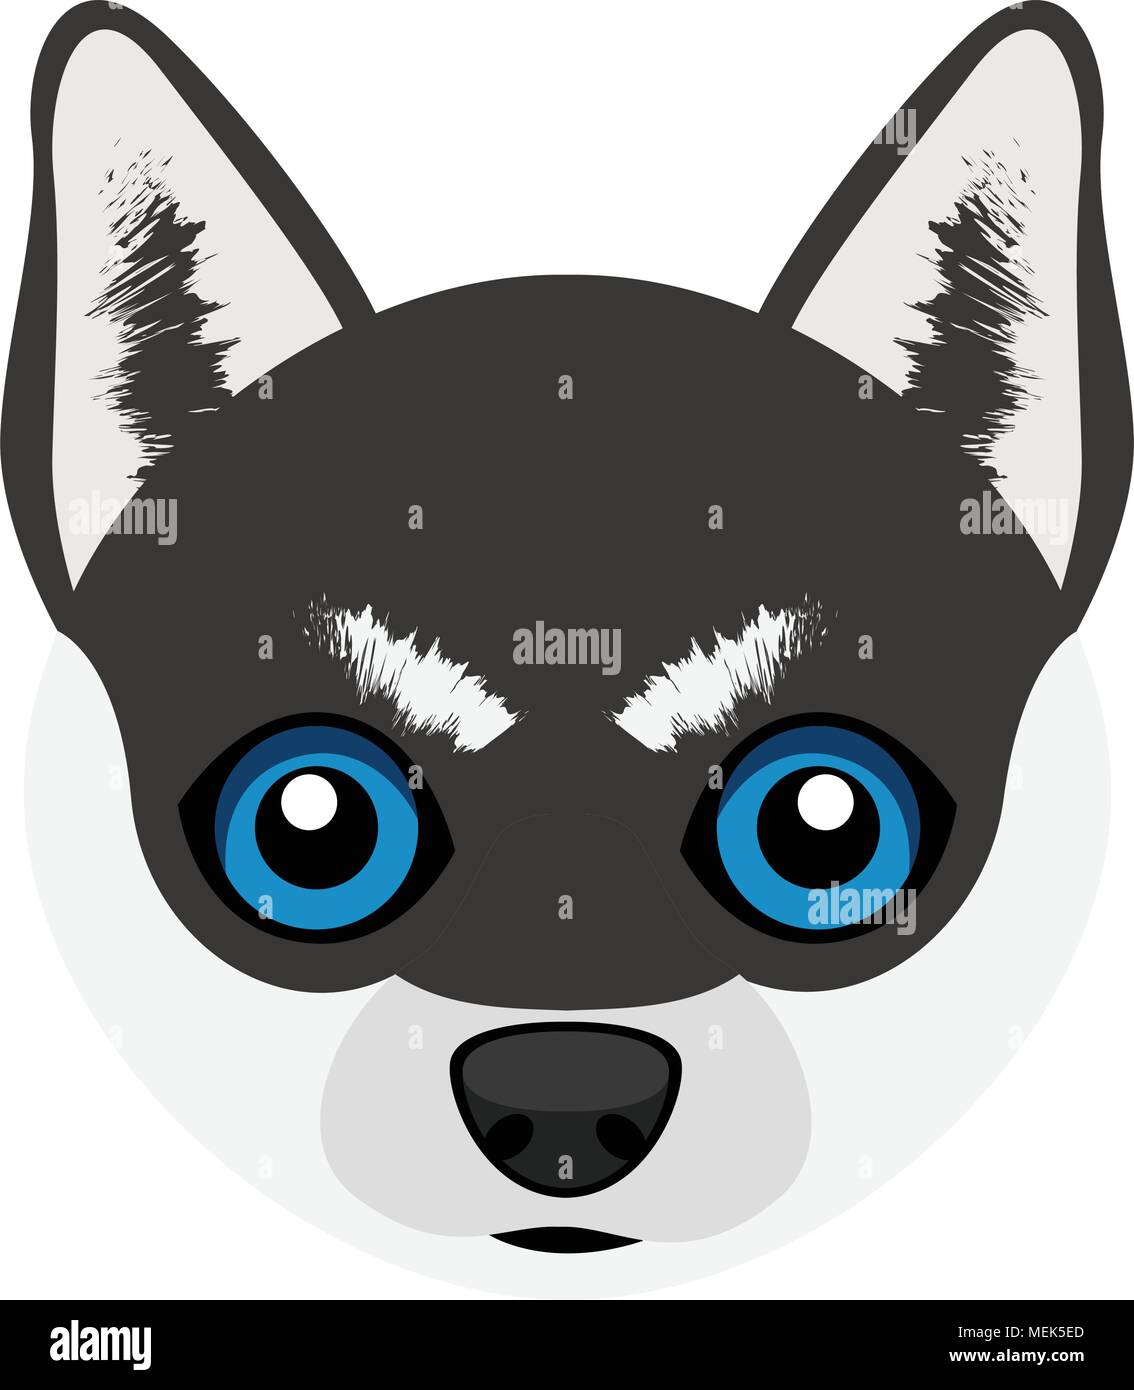 Avatar, dog, profile picture, animal face, cute, user, account icon -  Download on Iconfinder